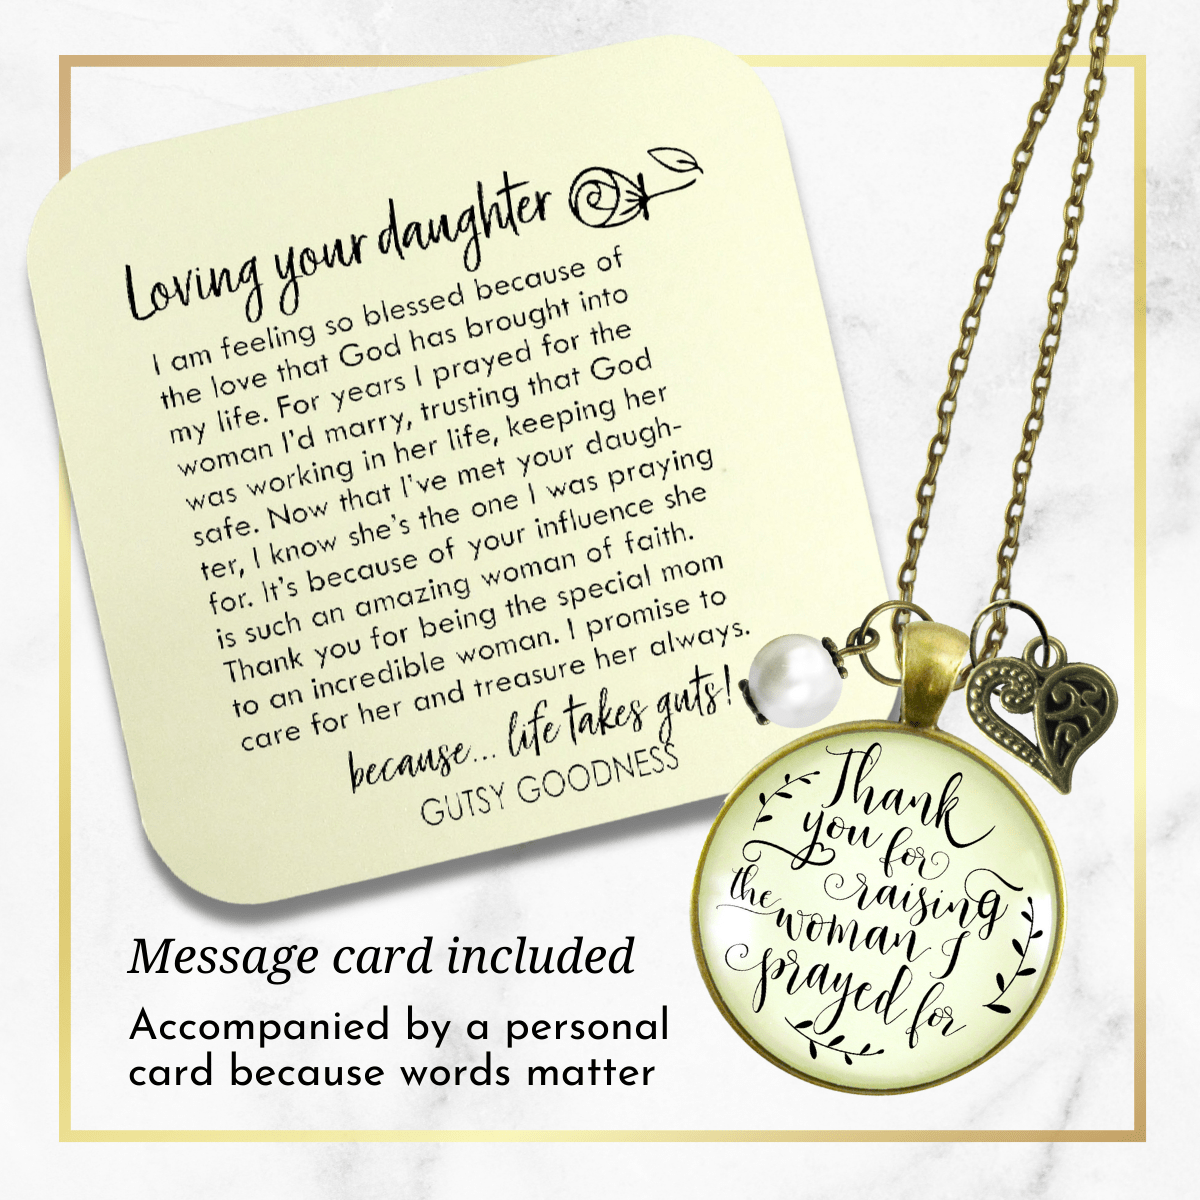 Gutsy Goodness Mother of Bride Necklace Thank You Raising Woman Prayed Wedding Gift - Gutsy Goodness Handmade Jewelry;Mother Of Bride Necklace Thank You Raising Woman Prayed Wedding Gift - Gutsy Goodness Handmade Jewelry Gifts